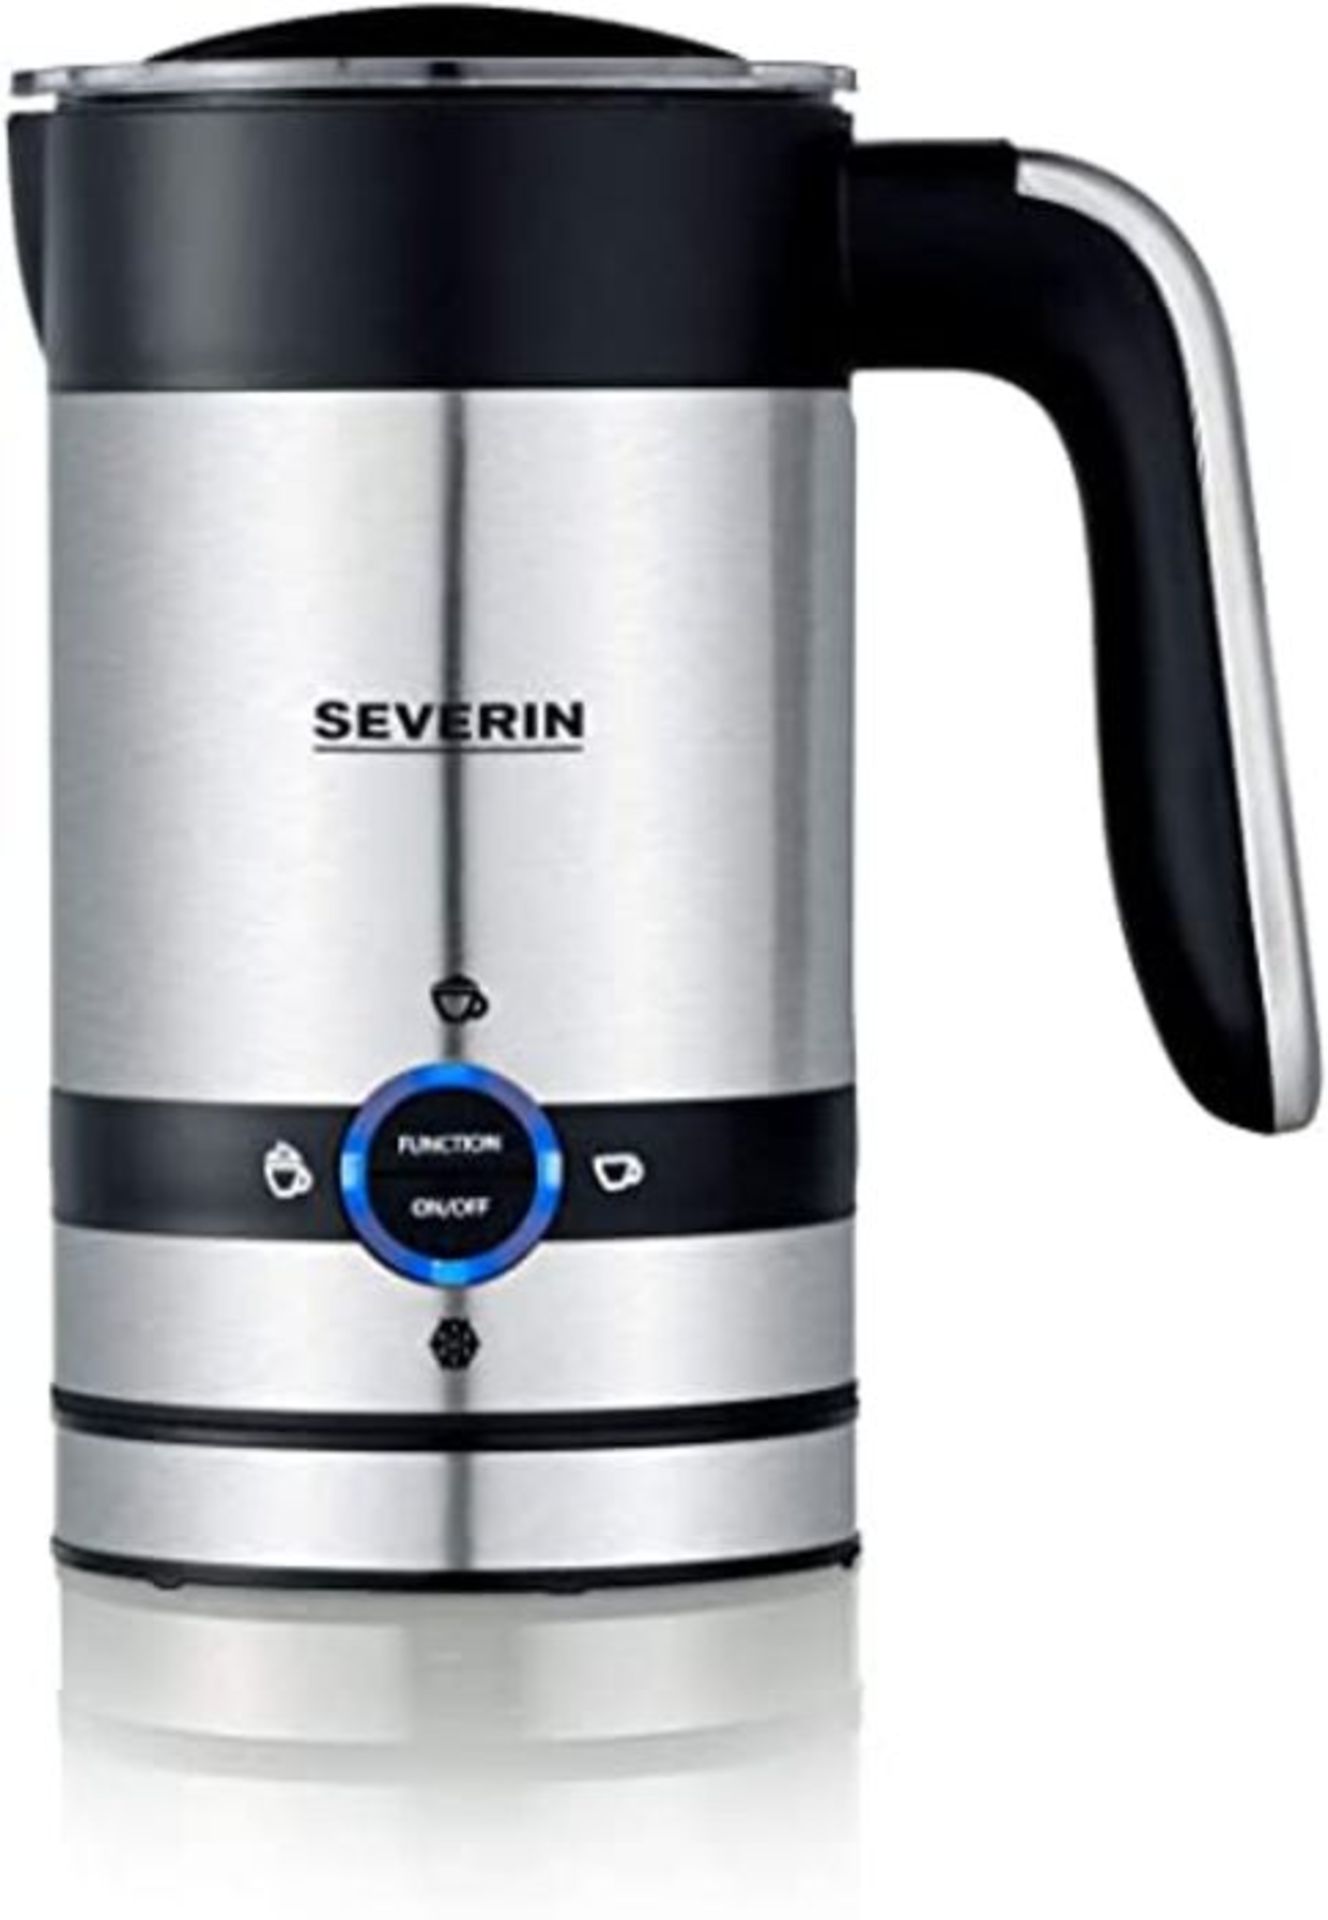 Severin 3584 Milk Frother, Stainless steel, 450 W, 200 milliliters